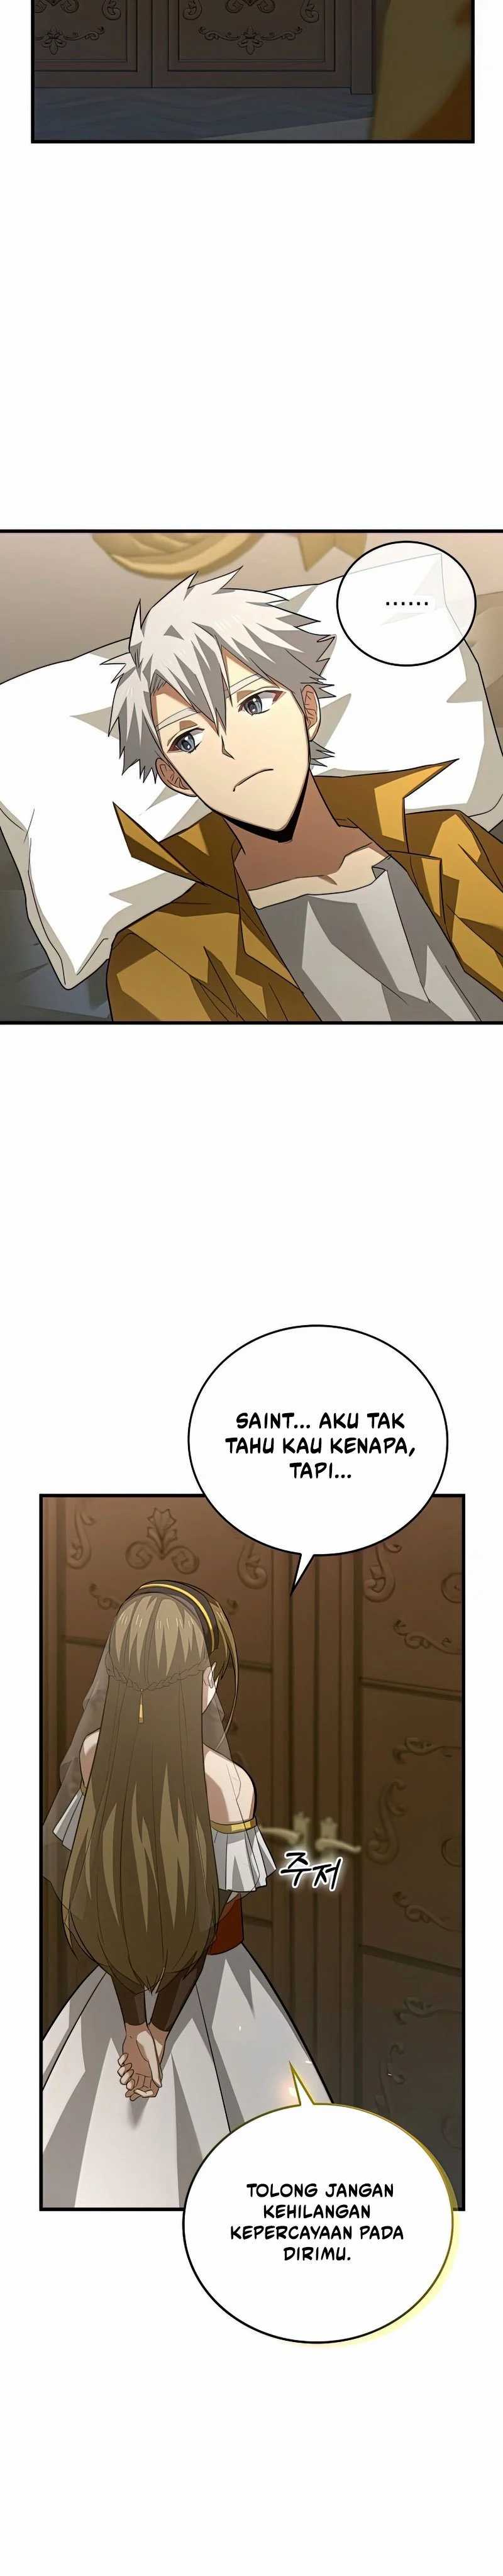 To Hell With Being A Saint, I’m A Doctor Chapter 29